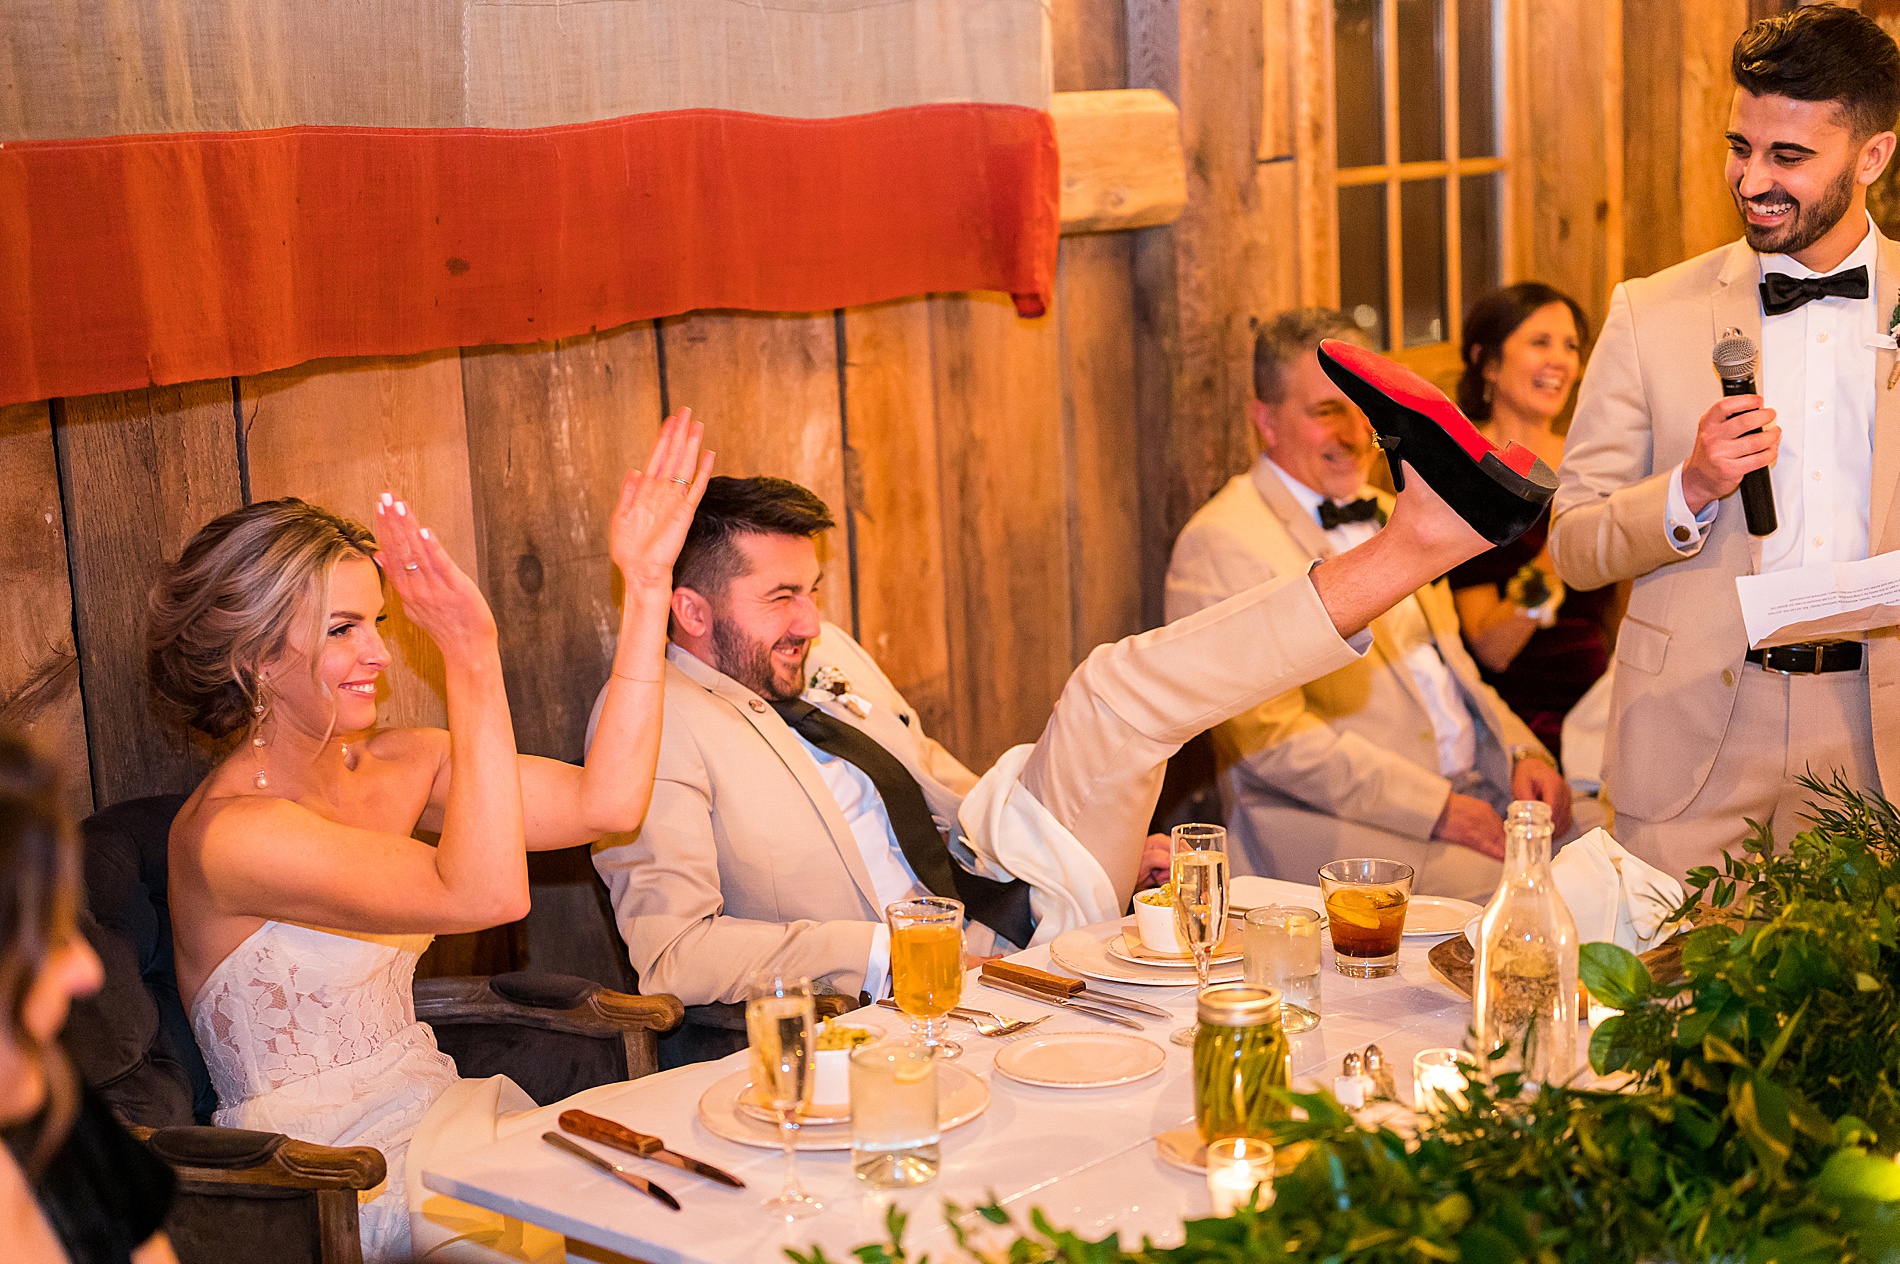 candid moment during Elegant NH Winter Wedding reception at the Barn on the Pemi